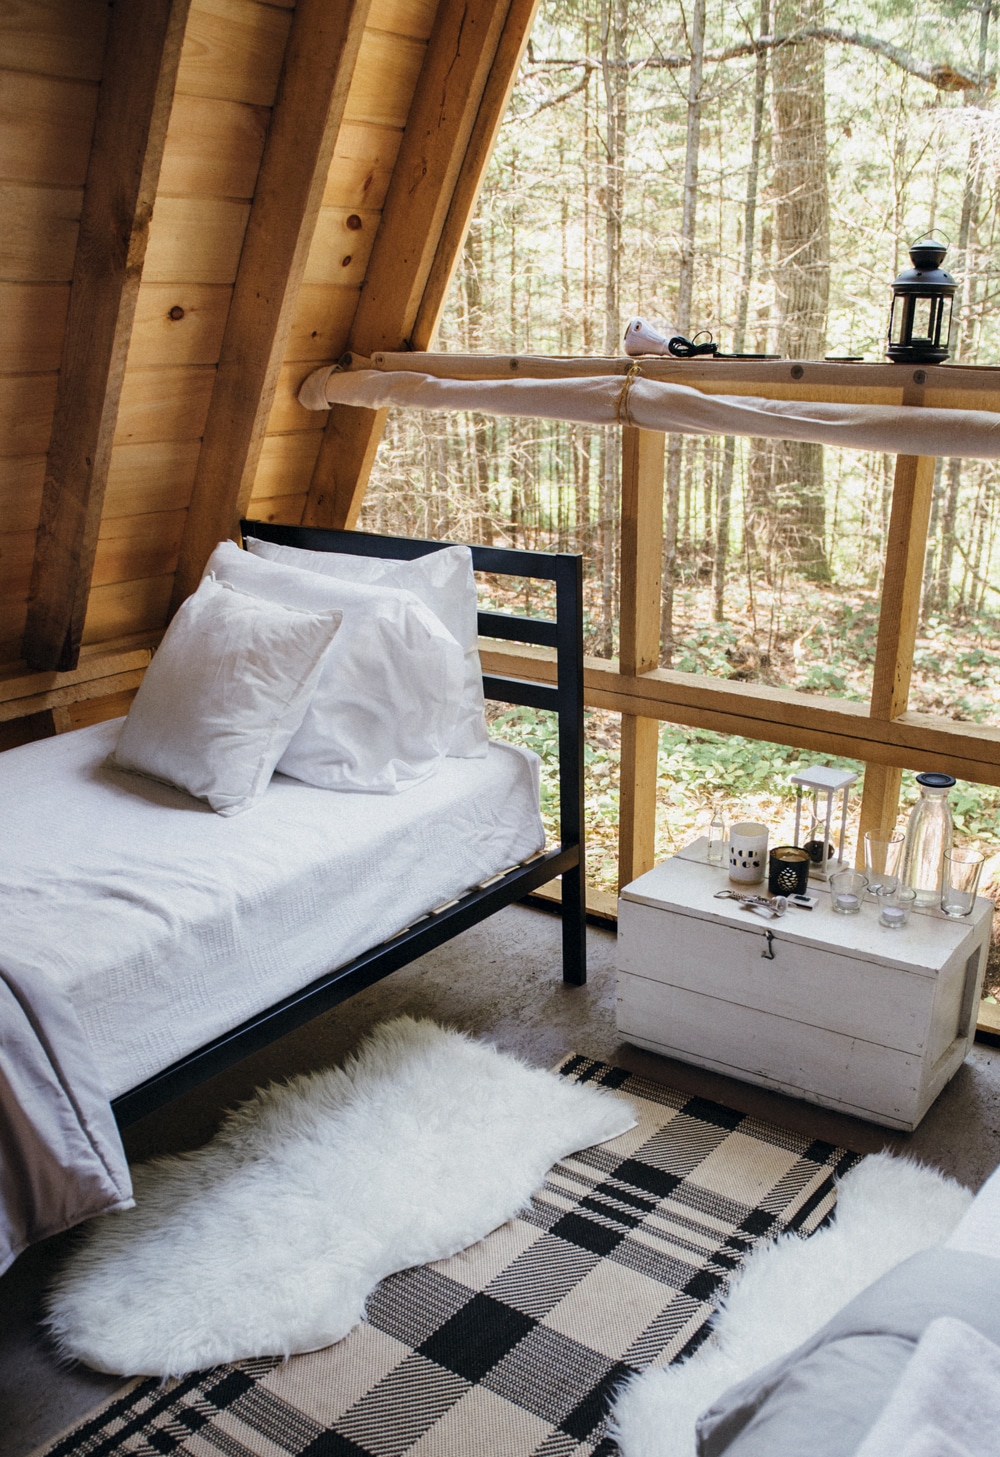 5 New England Luxury Camping "Glamping" Spots | Tops’l Farm